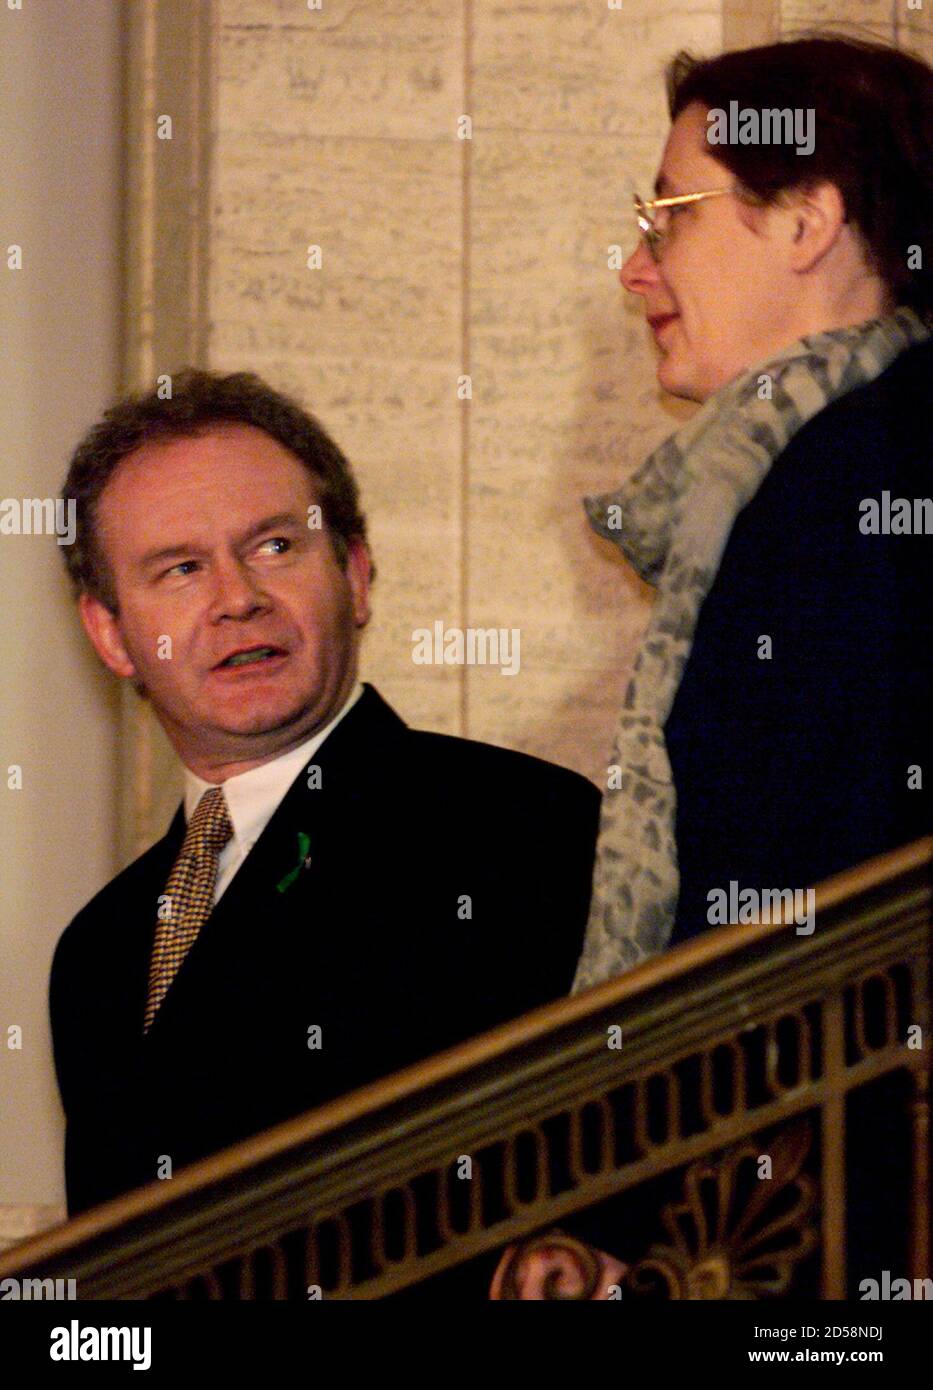 Sinn Fein's Martin McGuinness (L) and Bairbre de Brun walk towards the Assembly at Stormont Building, Belfast November 29. Protestant and Roman Catholic parties nominated ministers to a coalition government of pro-Irish Republicans and pro-British Unionists which will become fully operational on Thursday, when London will hand over power.  FP/FMS Stock Photo